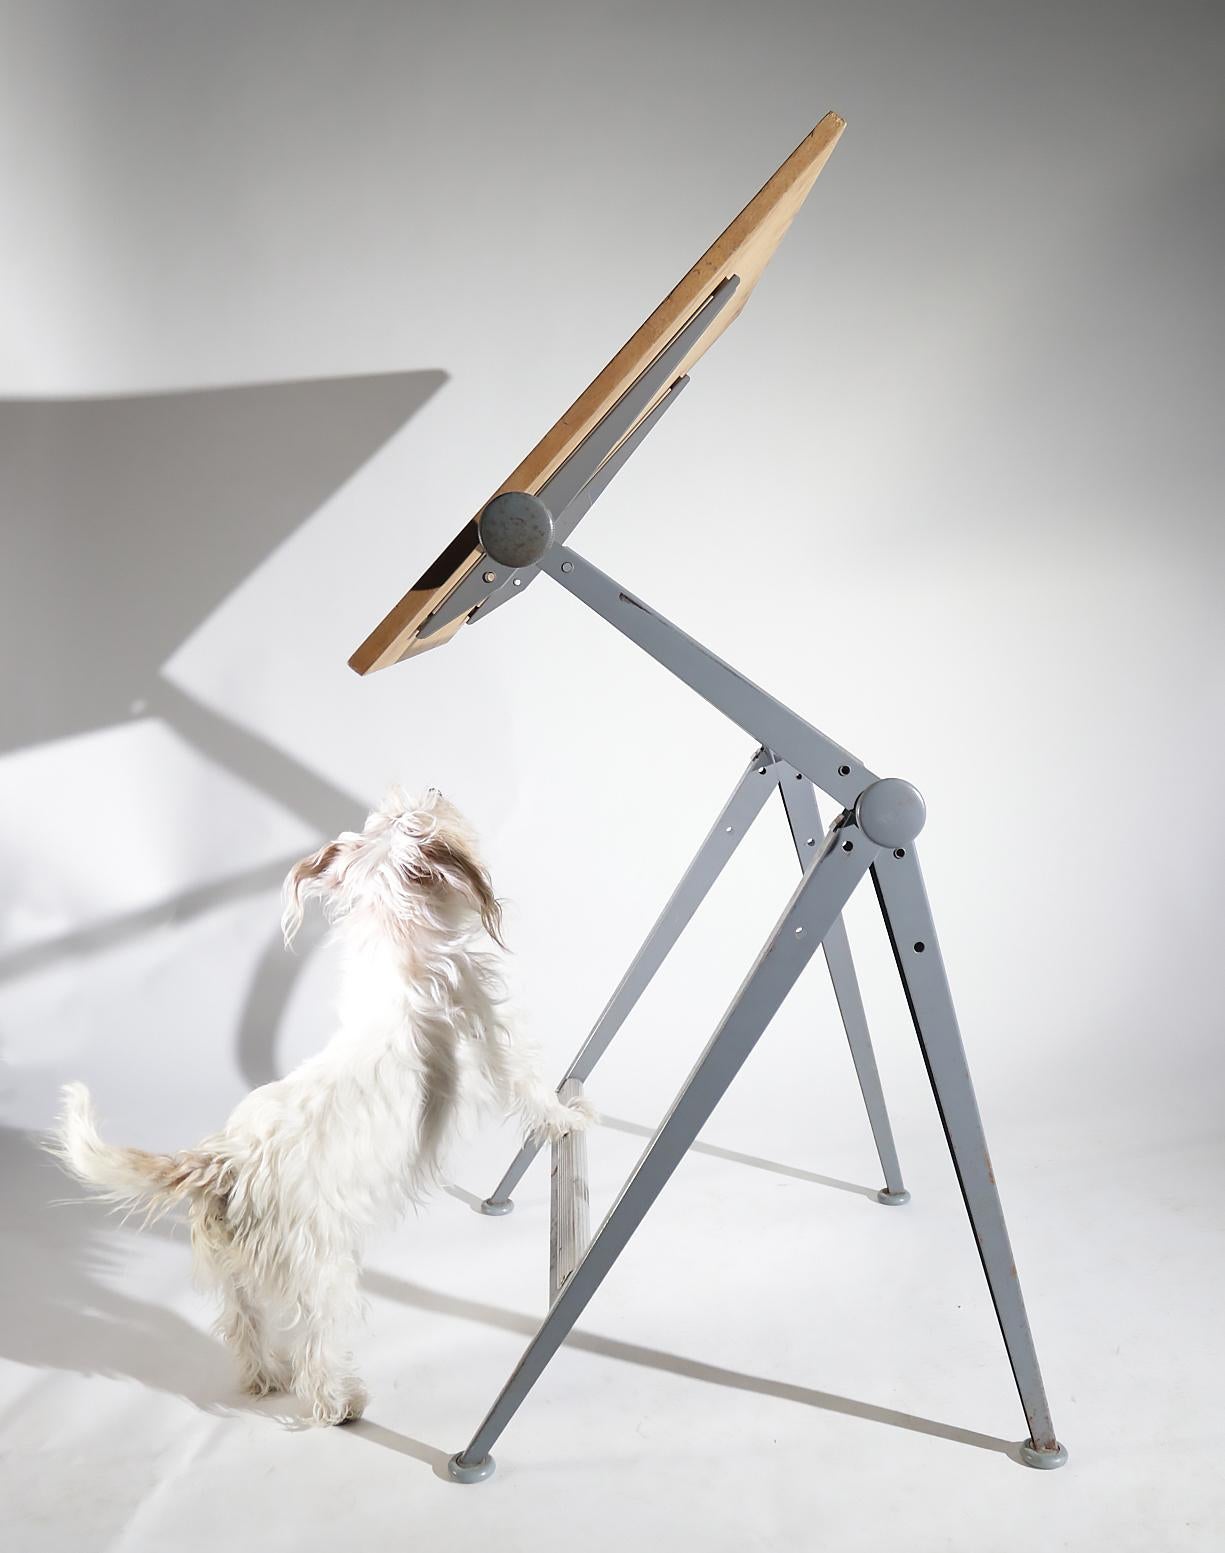 Reply Dutch design architect drafting table designed by Wim Rietveld and Friso Kramer for Ahrend de Circel in 1959.
Design Classic, awarded with the 